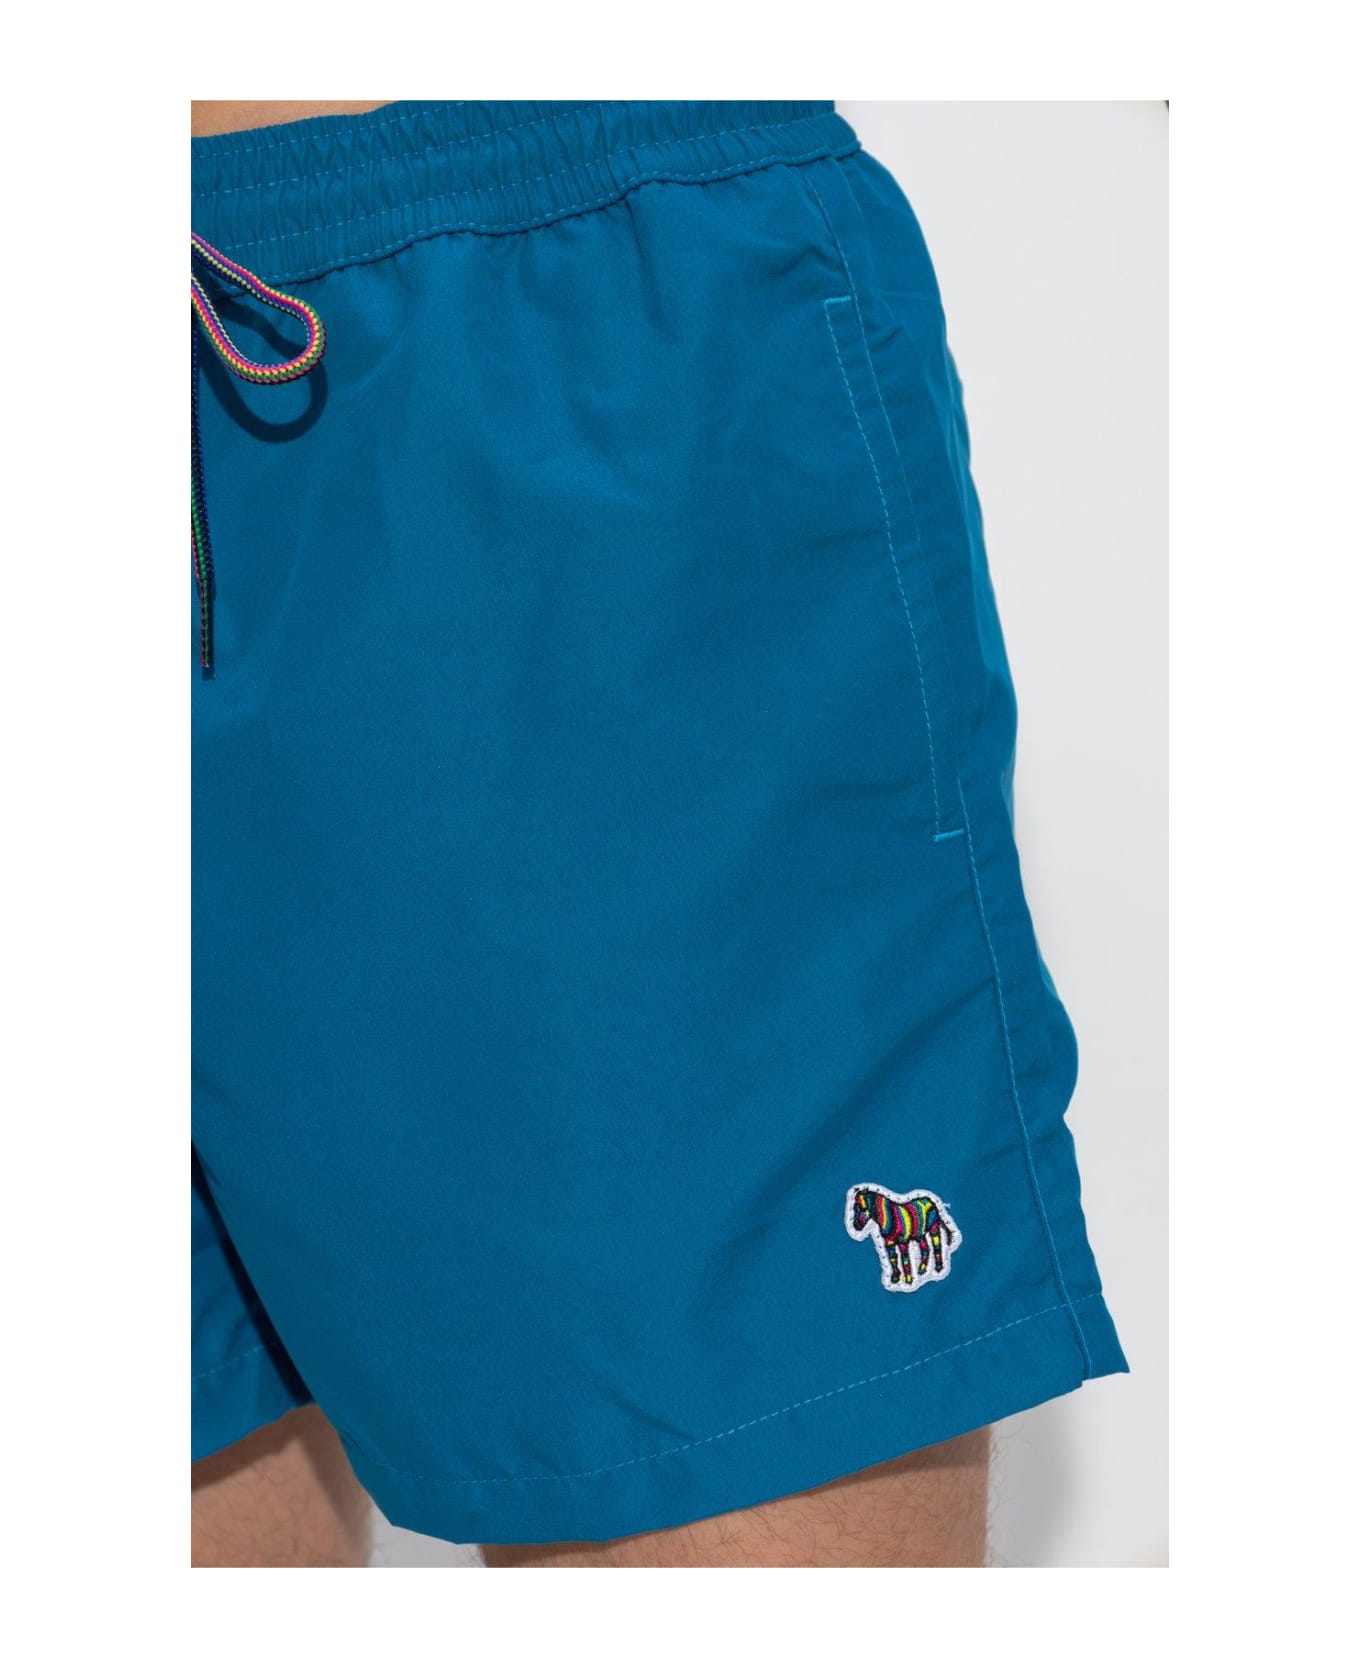 Paul Smith Swimming Shorts With Patch - Blue 水着